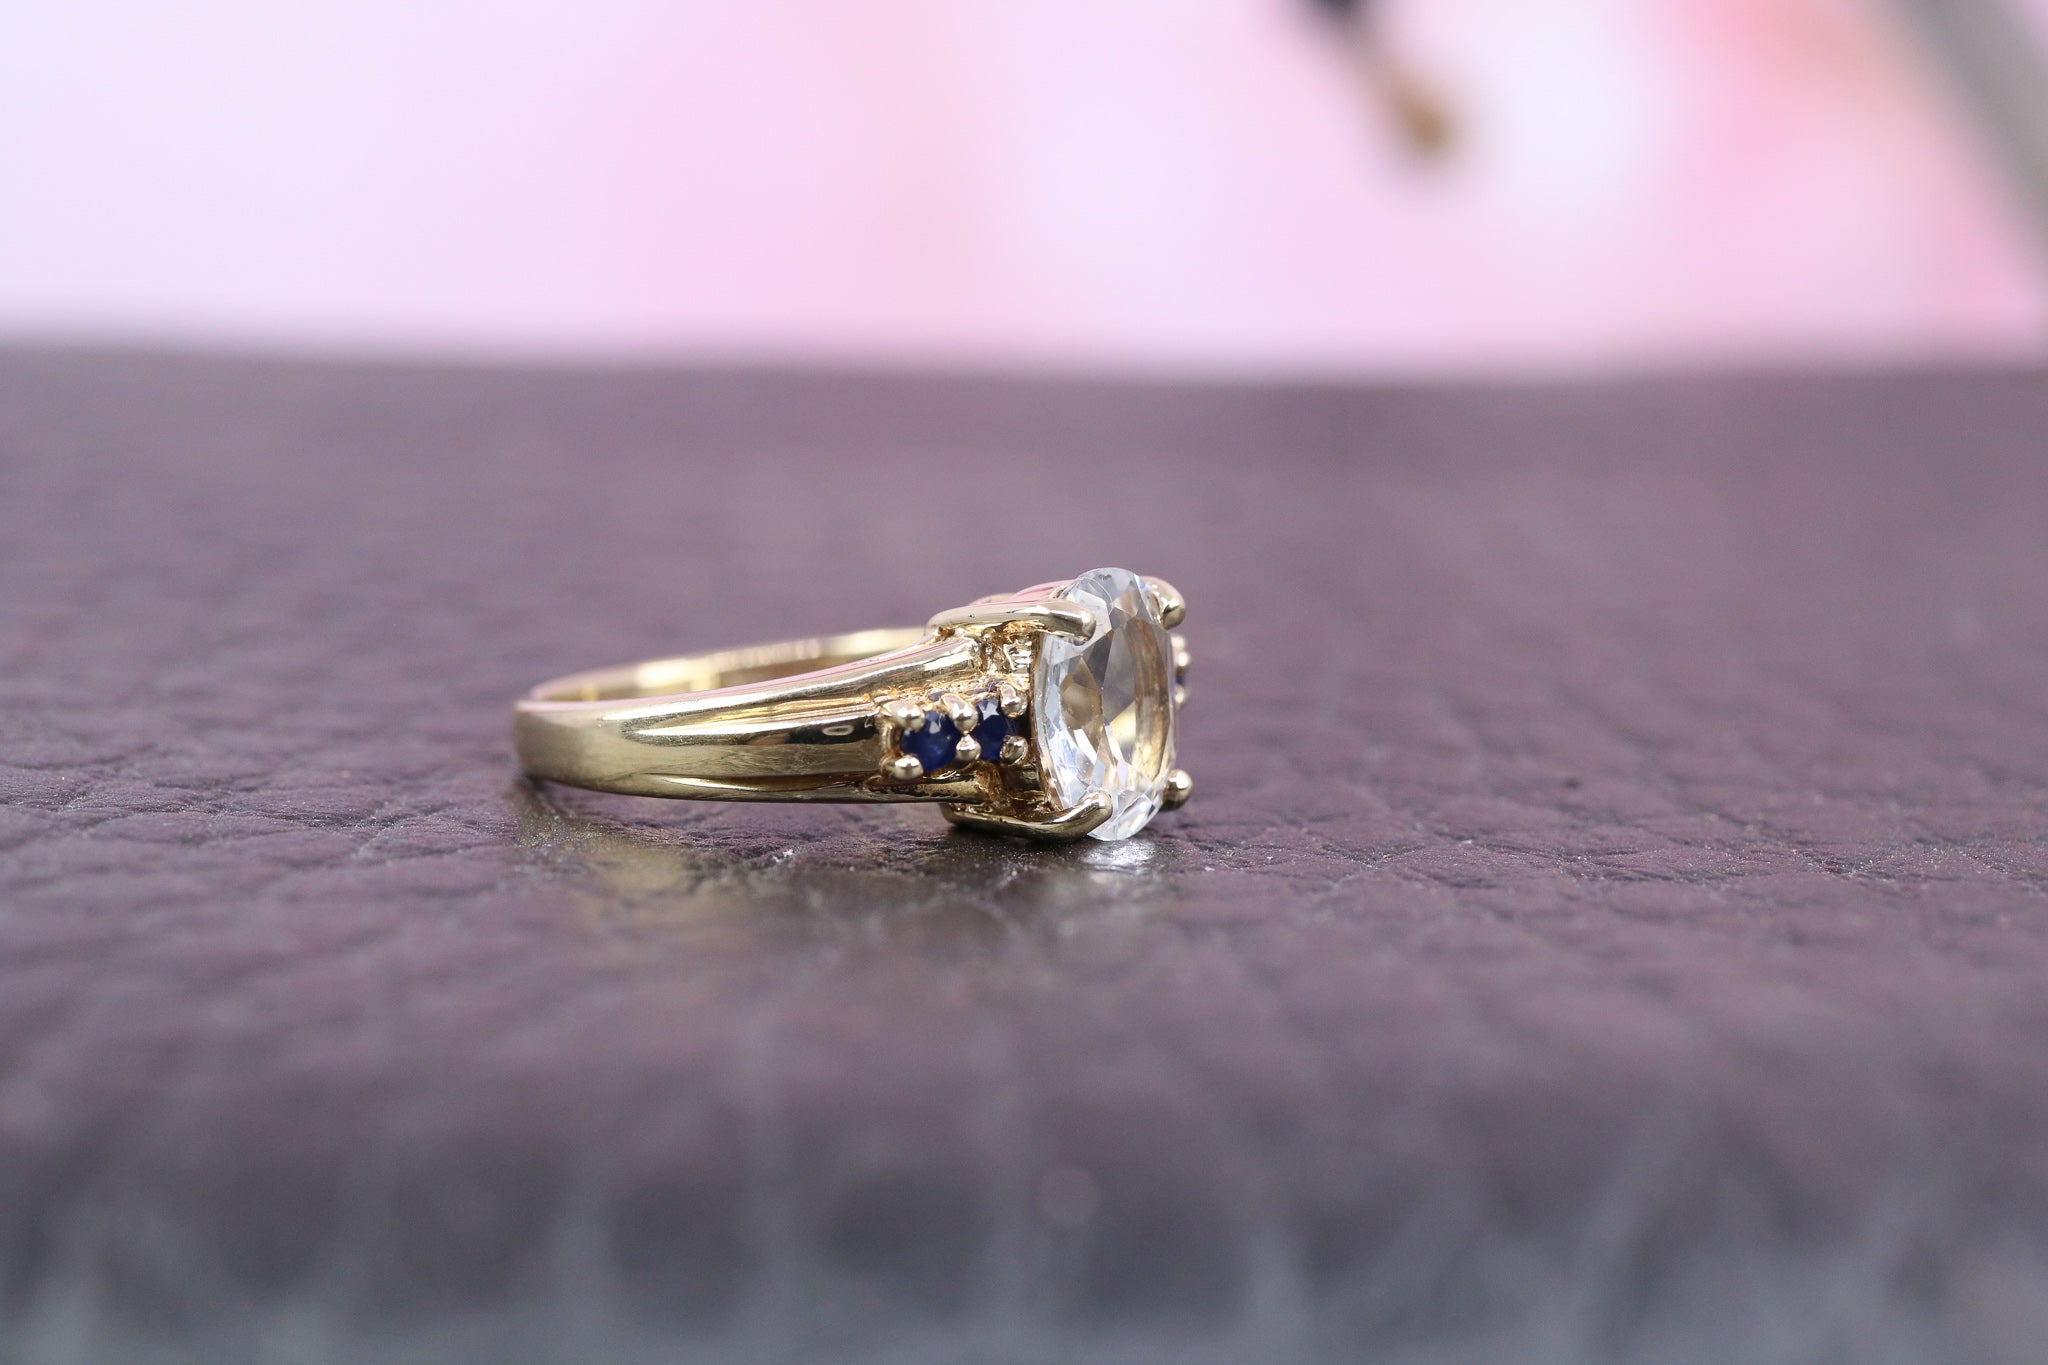 9ct Yellow Gold & CZ Ring - HJ2576 - Hallmark Jewellers Formby & The Jewellers Bench Widnes